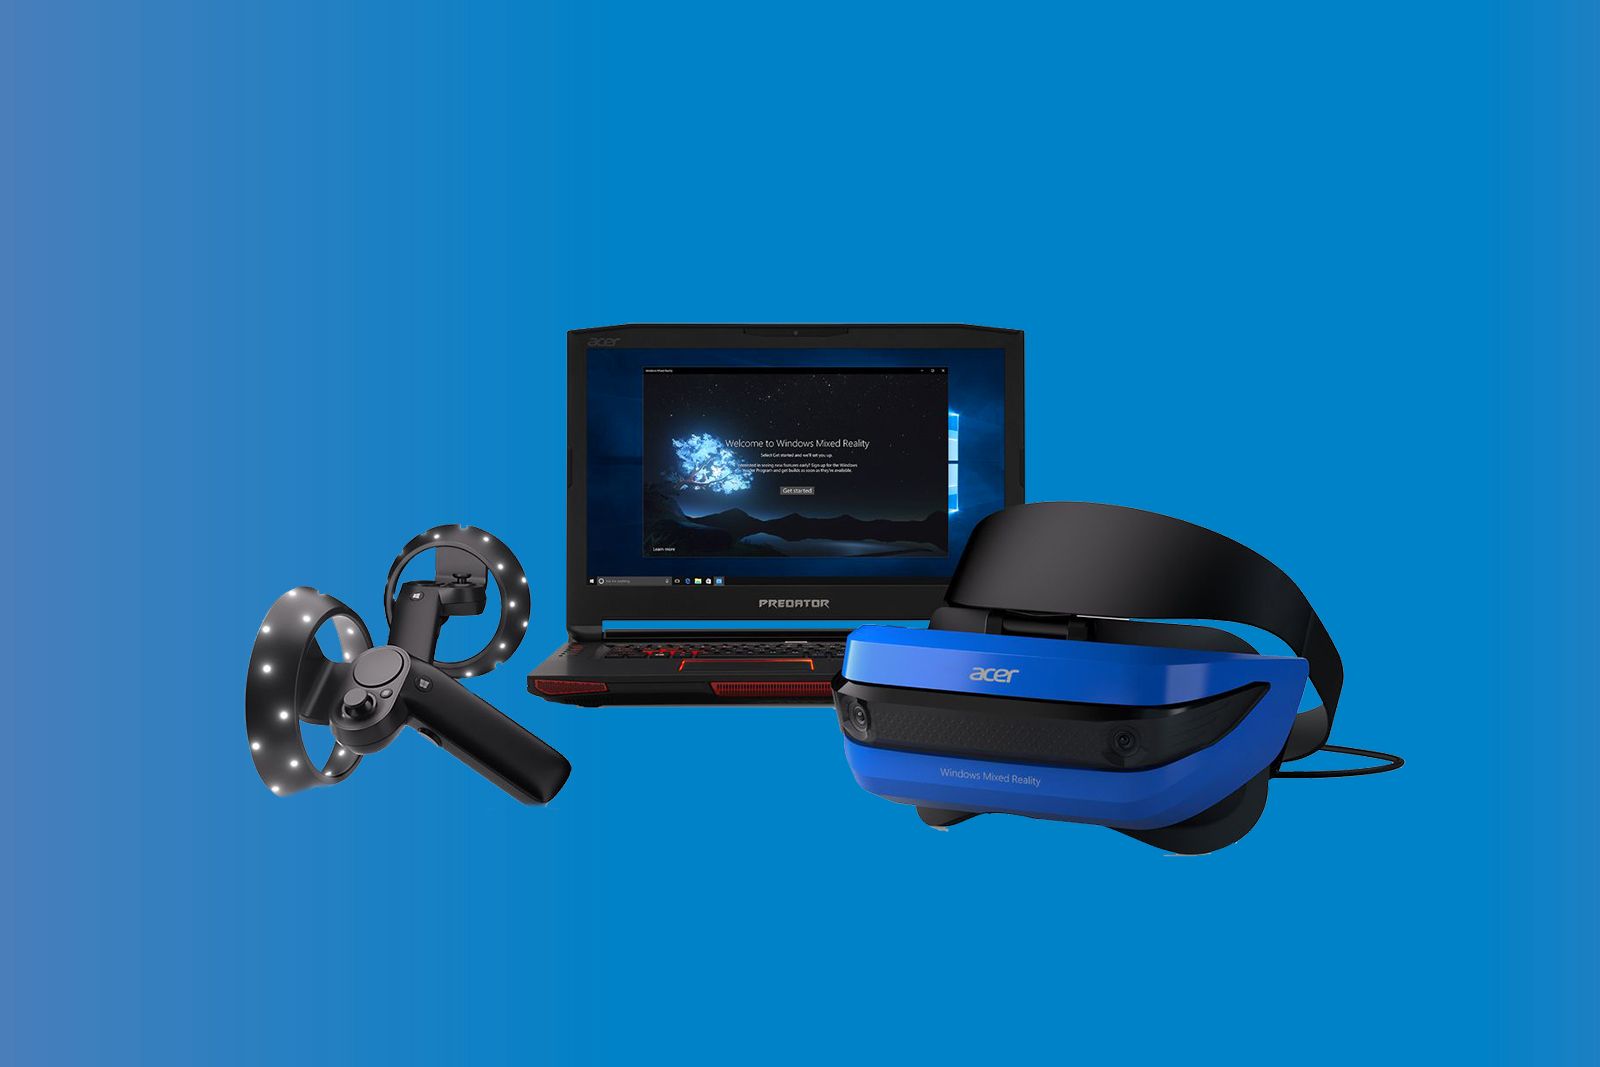 Microsoft Mixed Reality update Dell headset pricing SteamVR support and more image 1